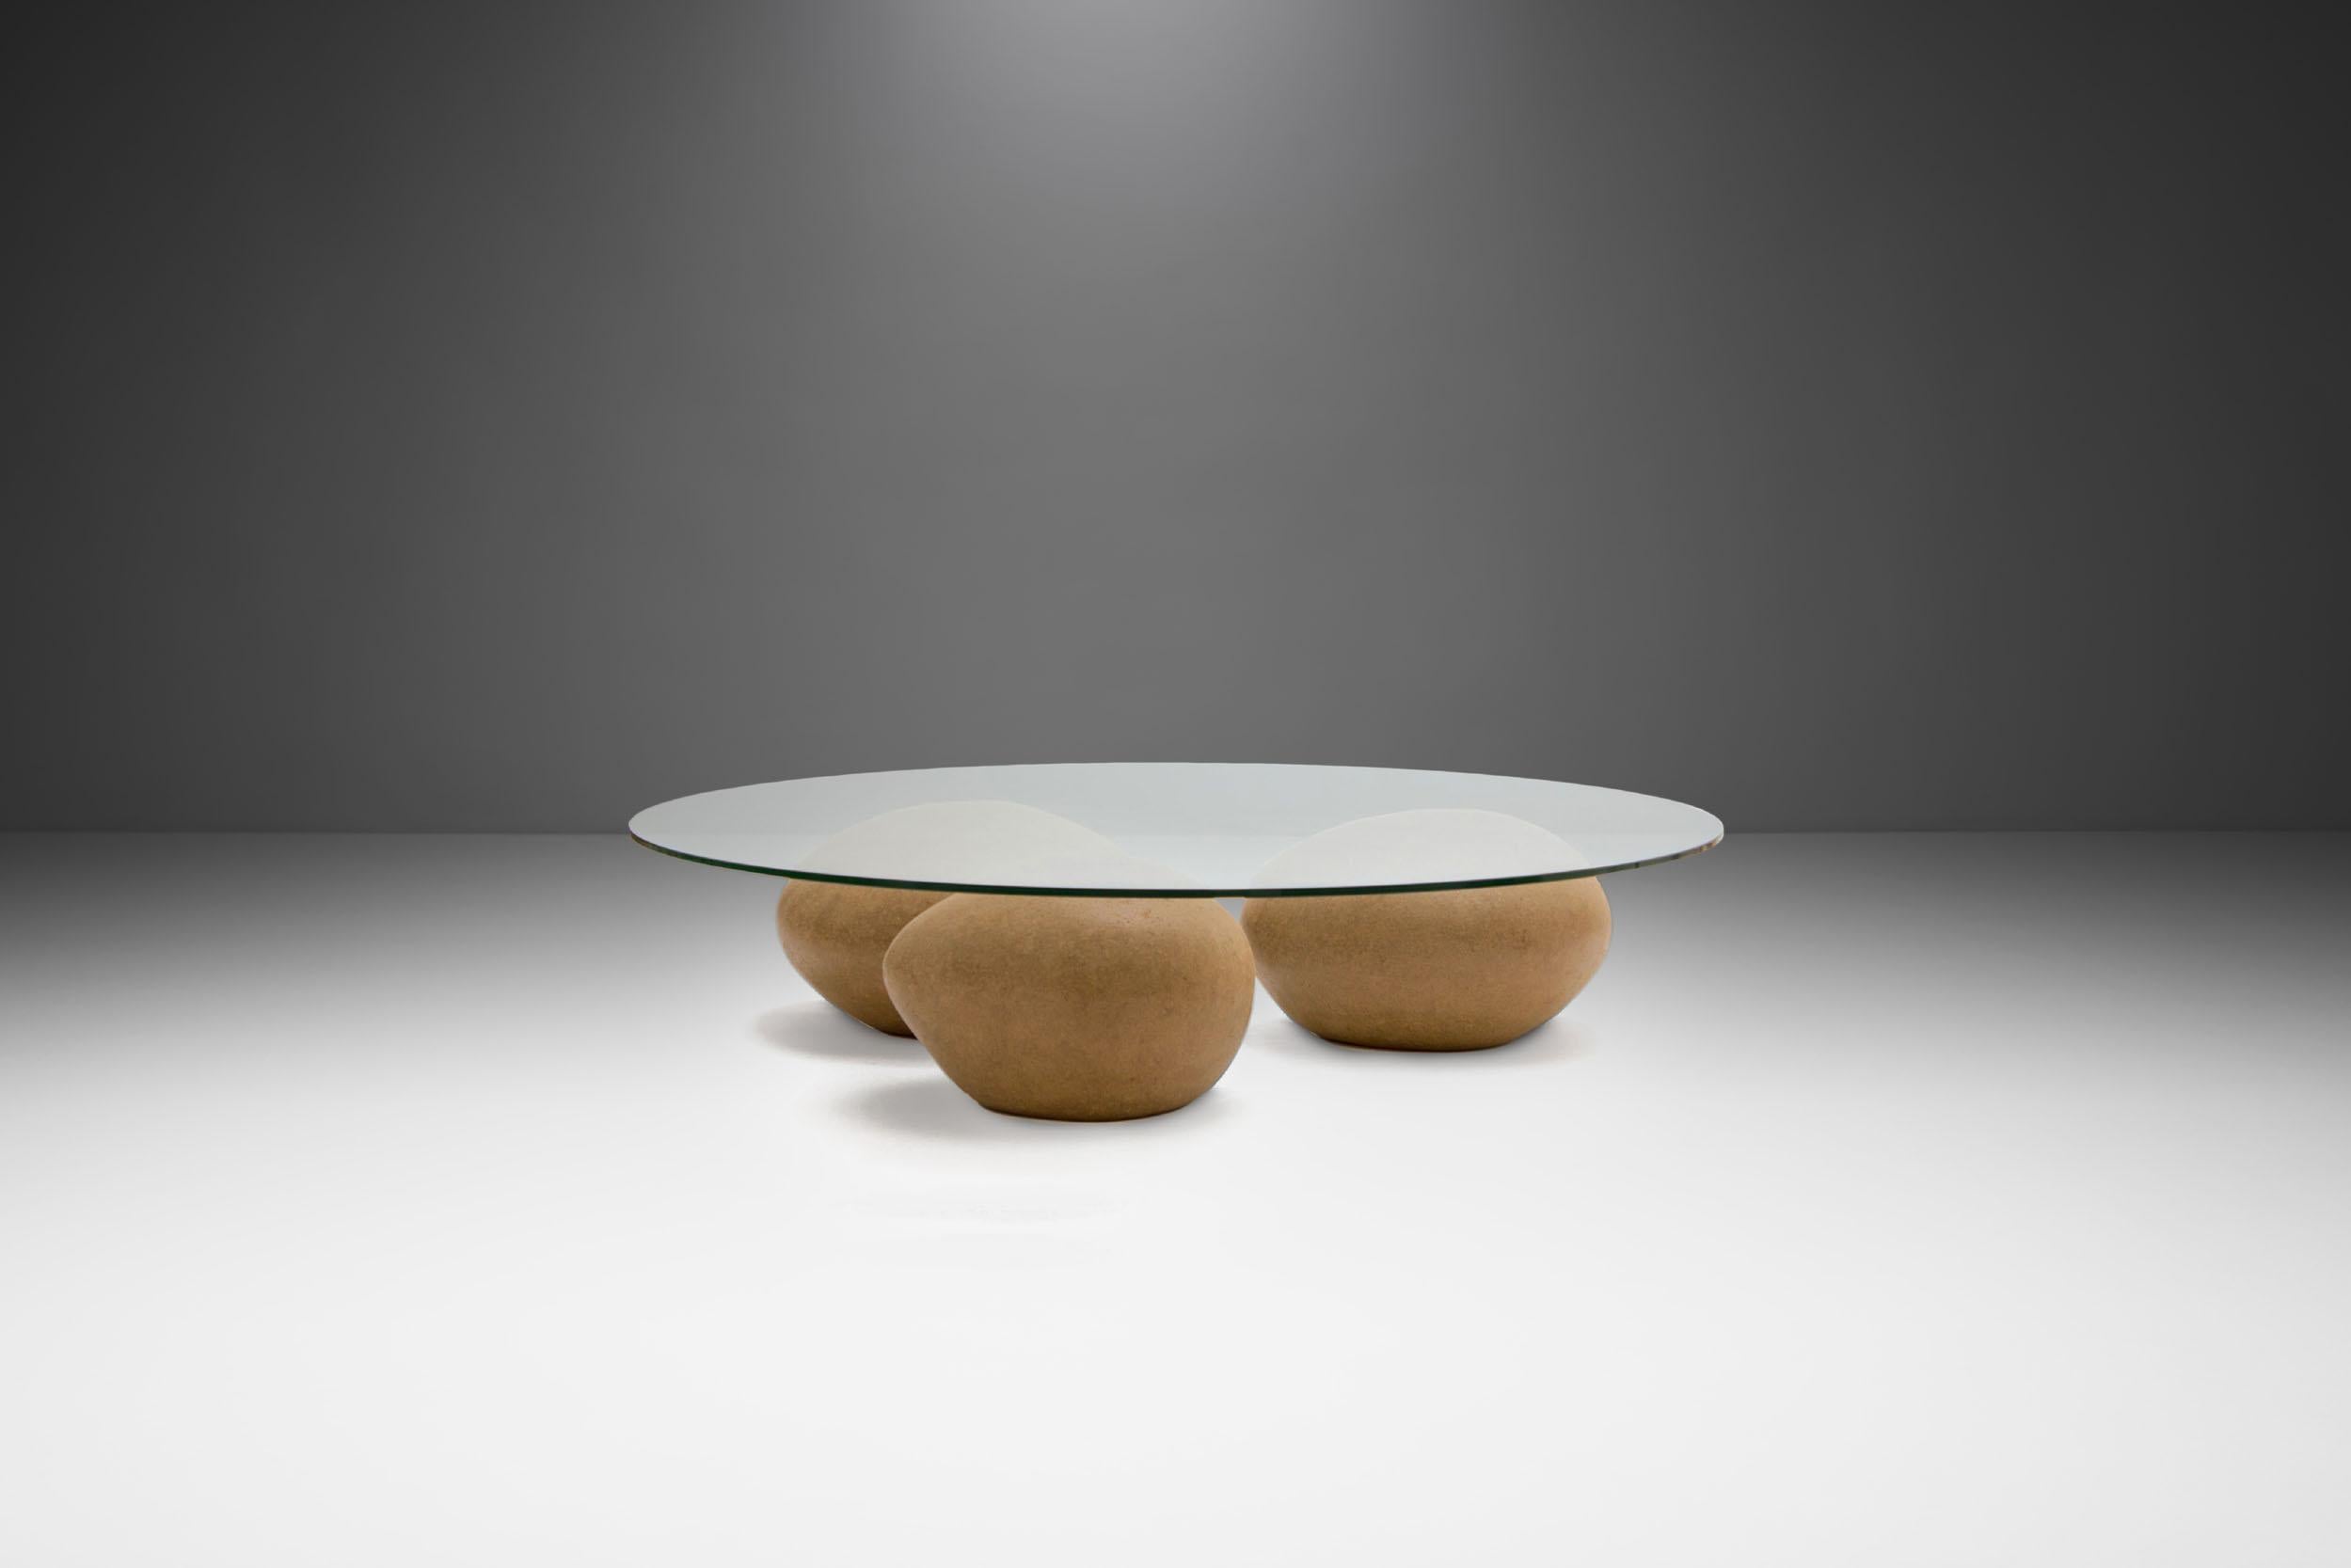 This Água table by contemporary artist Domingos Tótora, is an exceptional piece. The name, meaning water in Portuguese speaks for itself.

The Água table comprises of three pebble-like shapes under a glass top that resemble water washing over